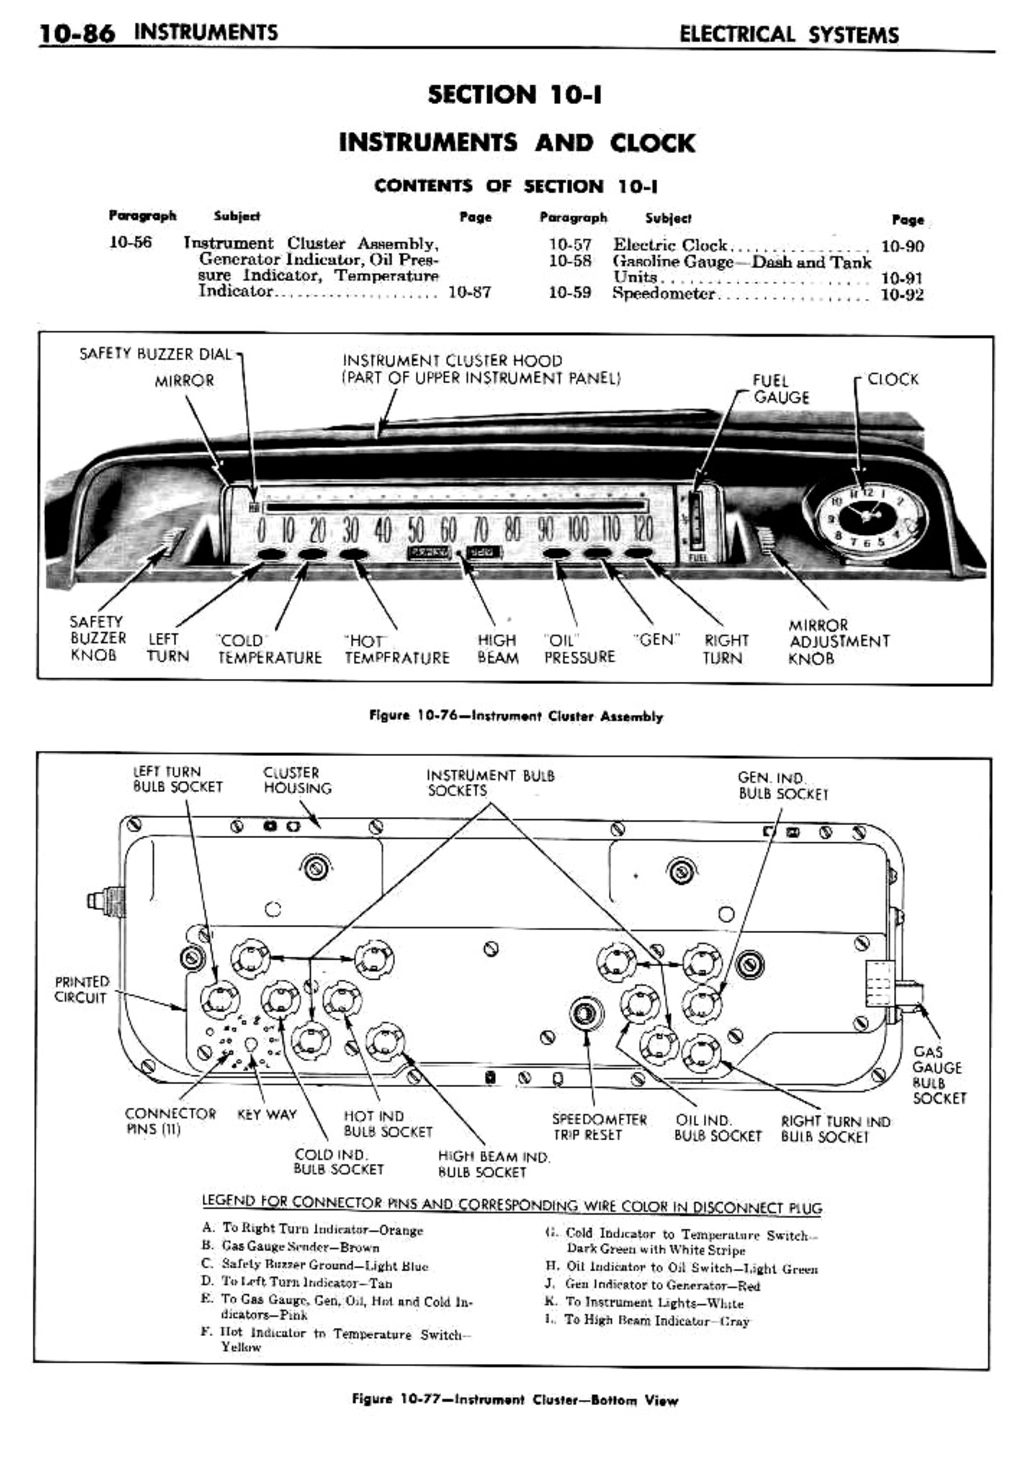 n_11 1960 Buick Shop Manual - Electrical Systems-086-086.jpg